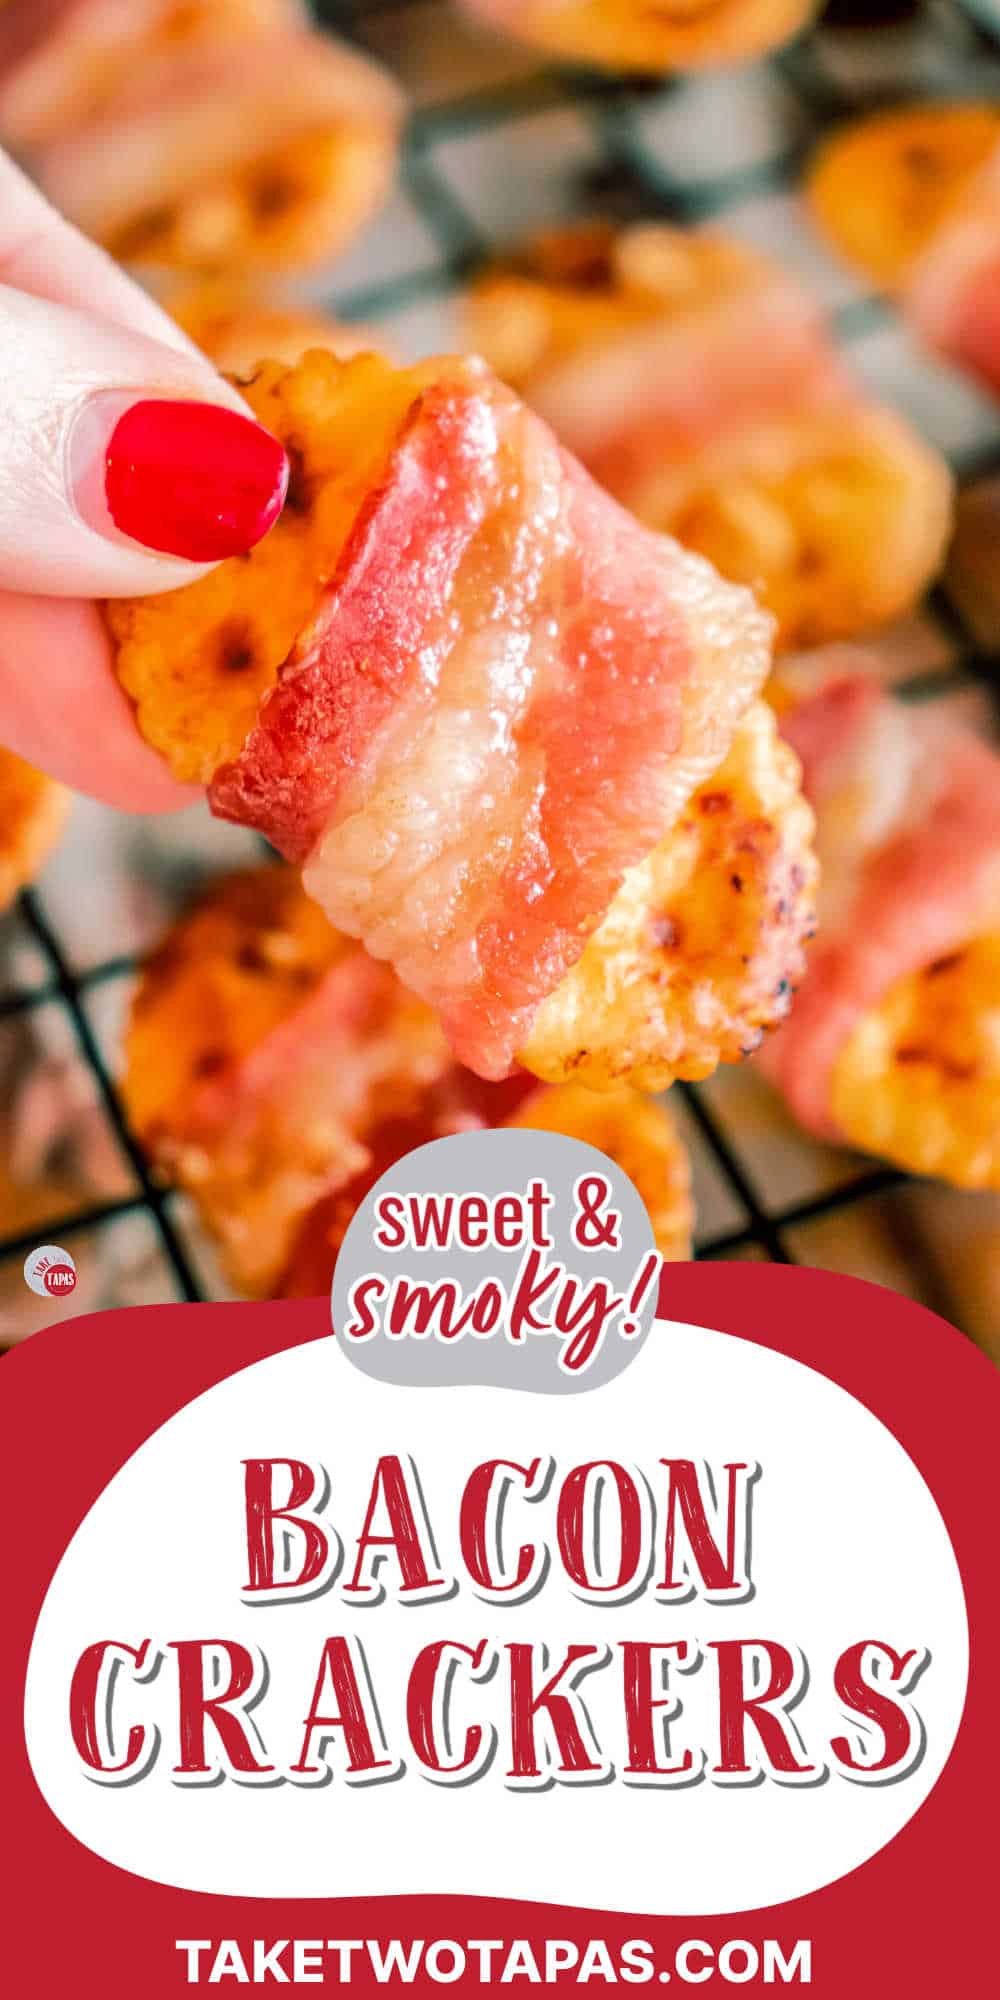 great appetizer in a hand with red banner and text